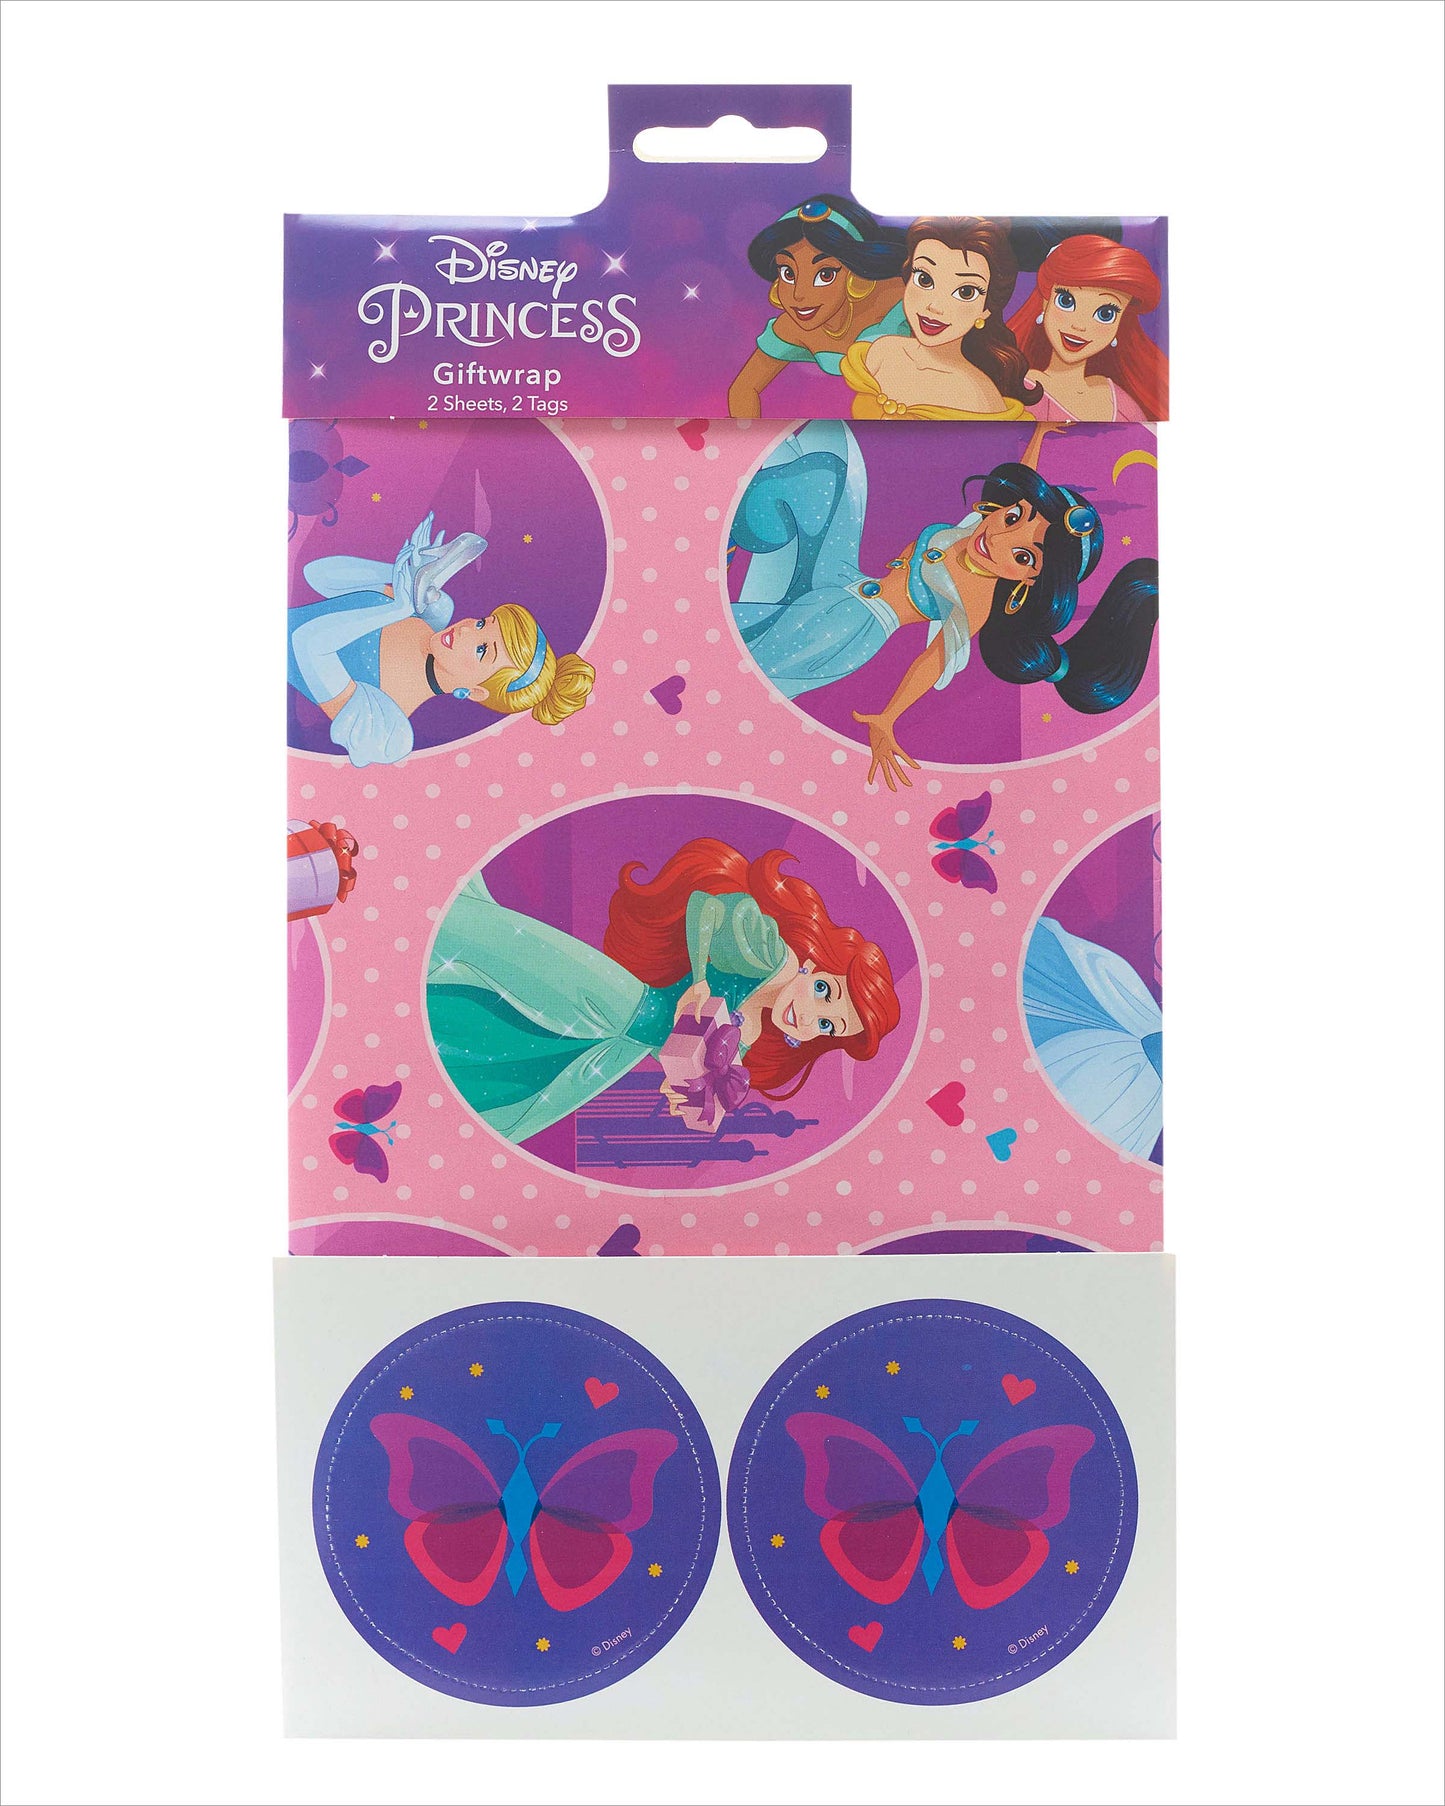 Disney Princess Pink Gift Wrap Pack Contains 2 Sheets & Tags